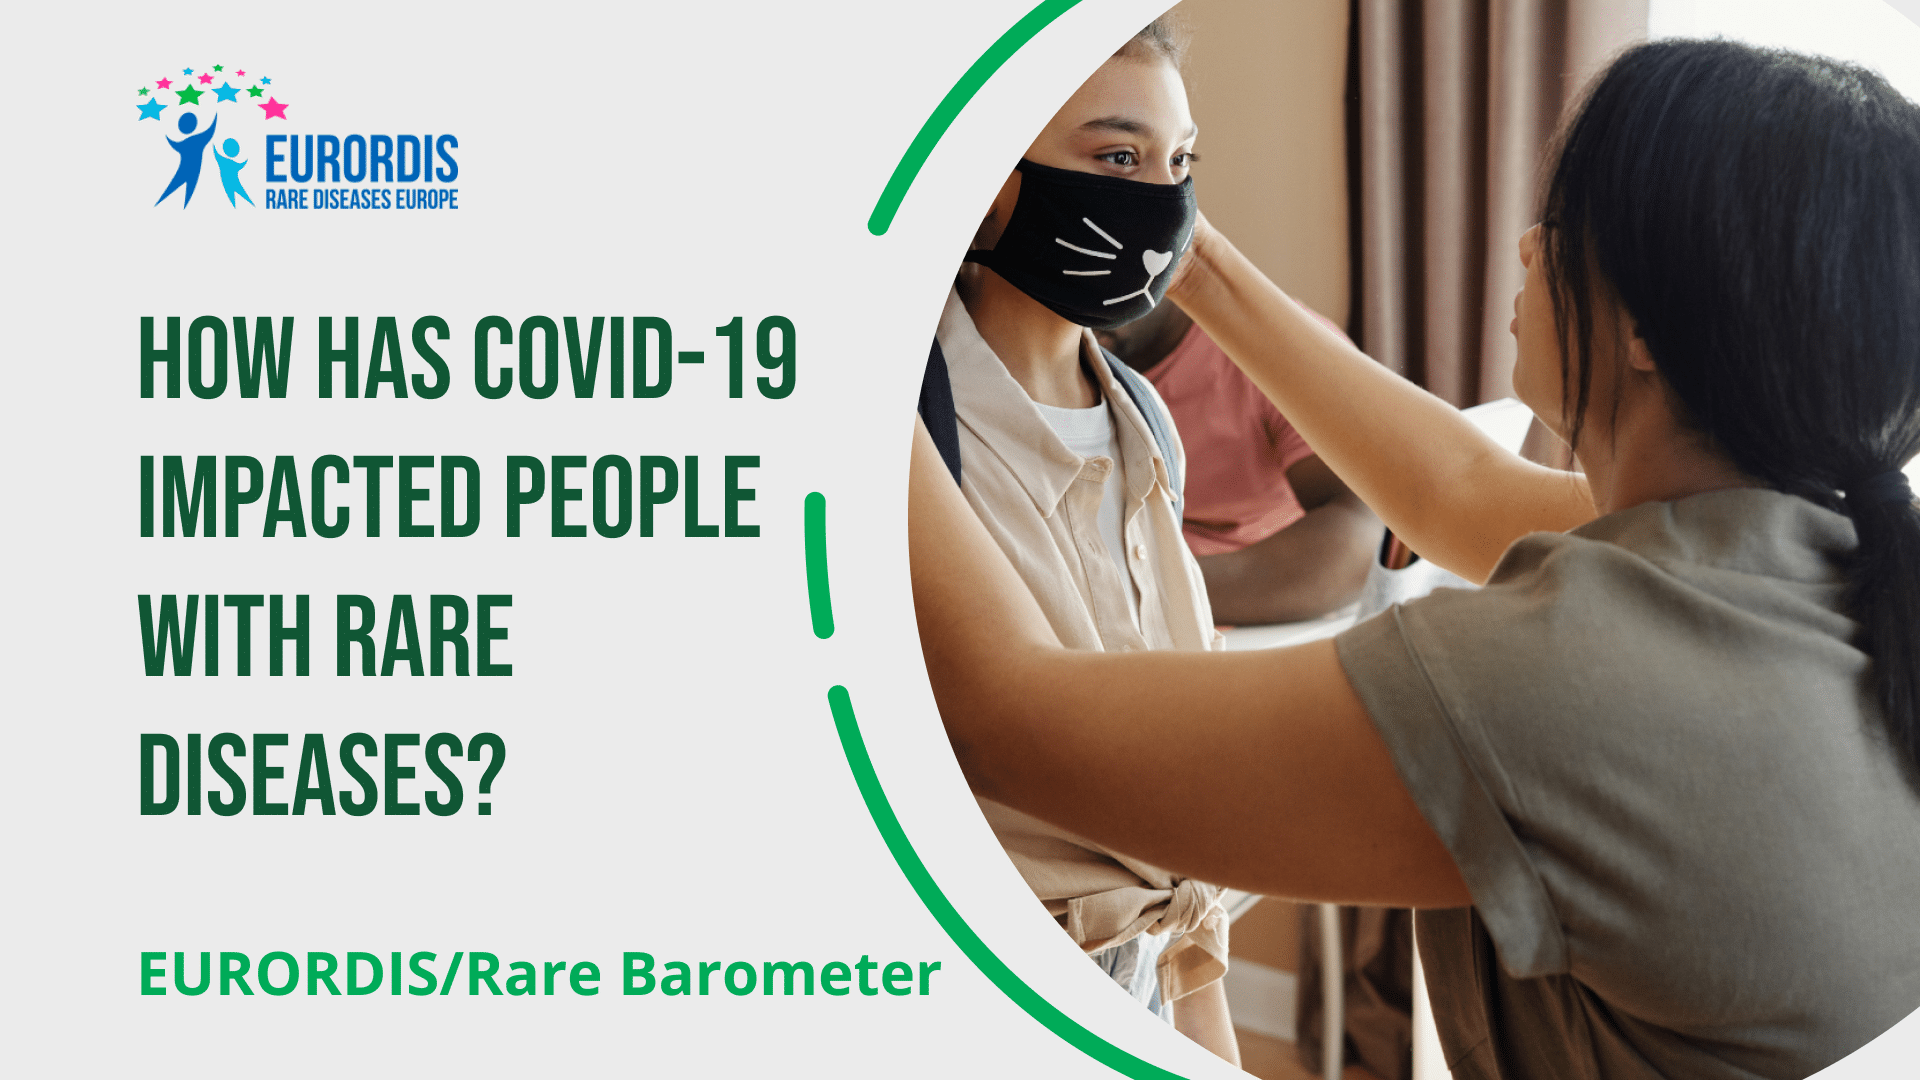 How has COVID-19 impacted people with rare diseases?